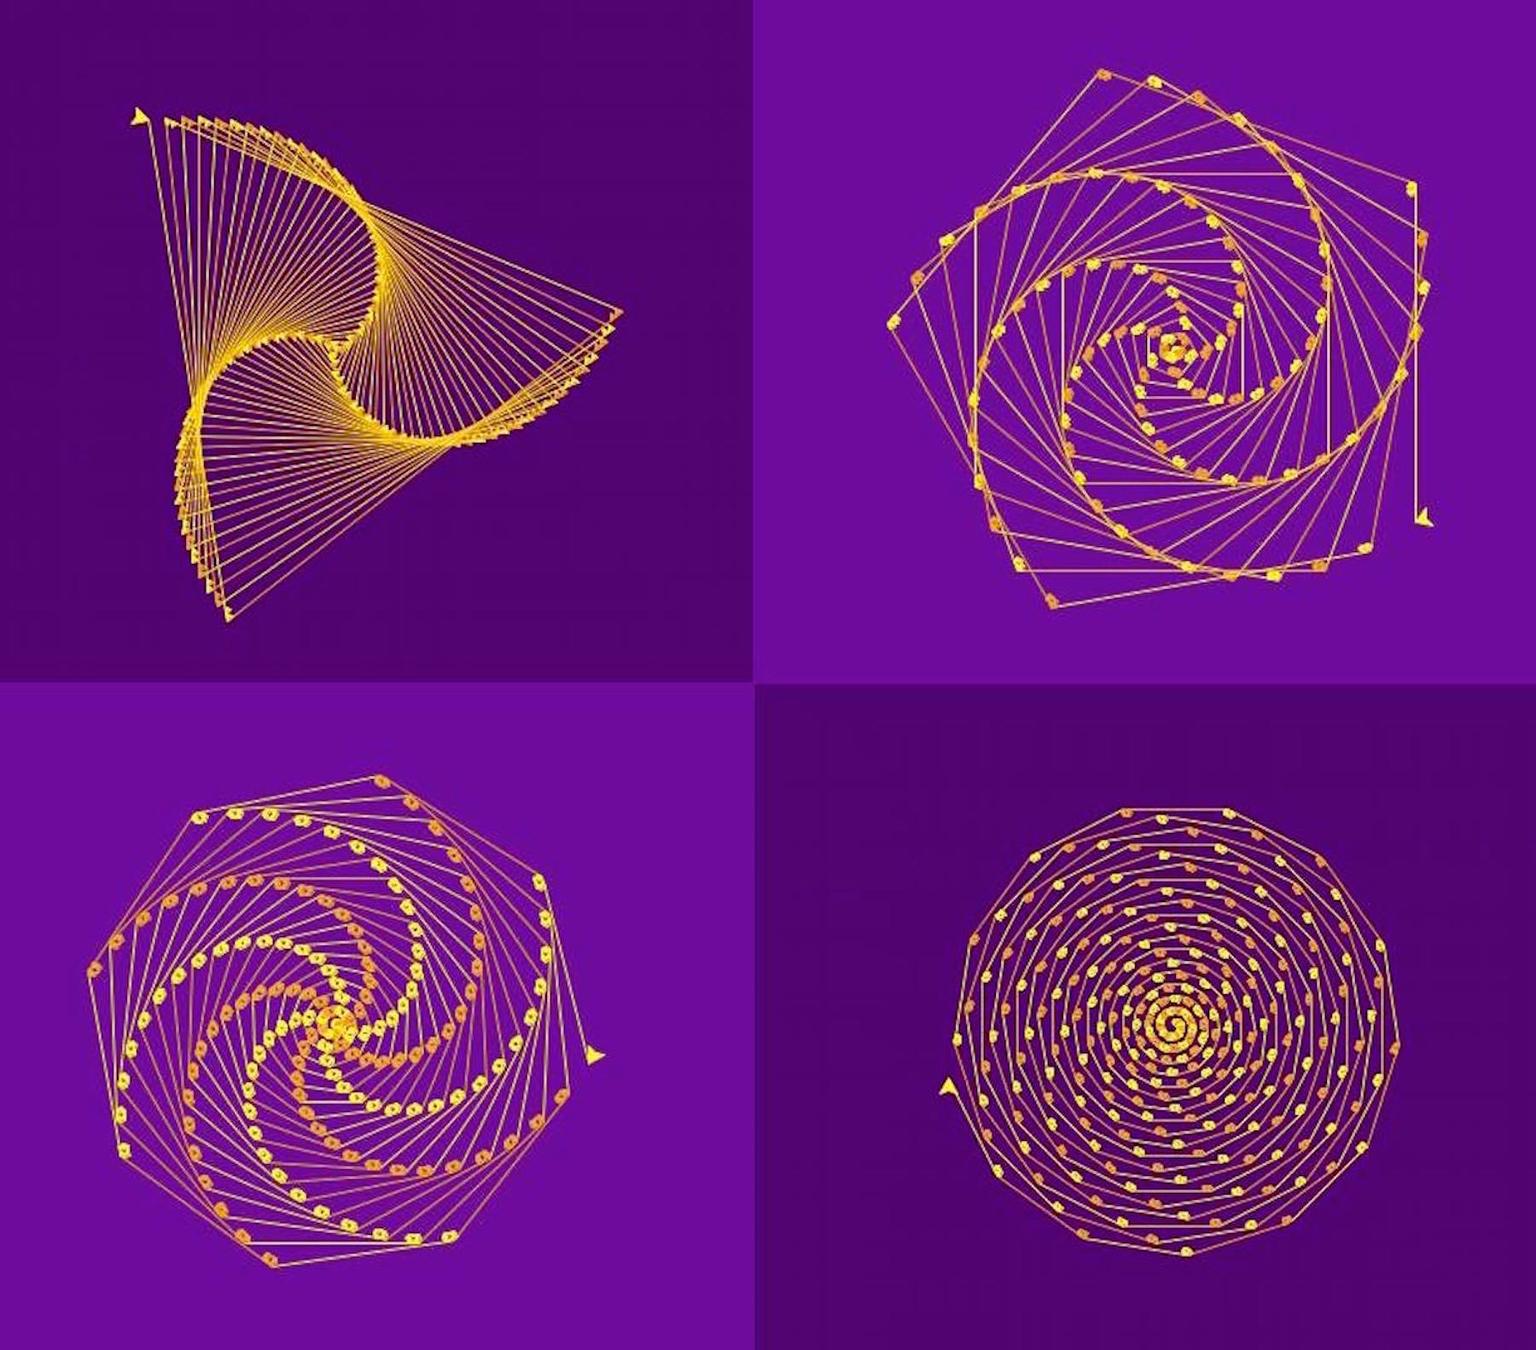 Image for entry 'Polygons with Fibonacci Spirals'